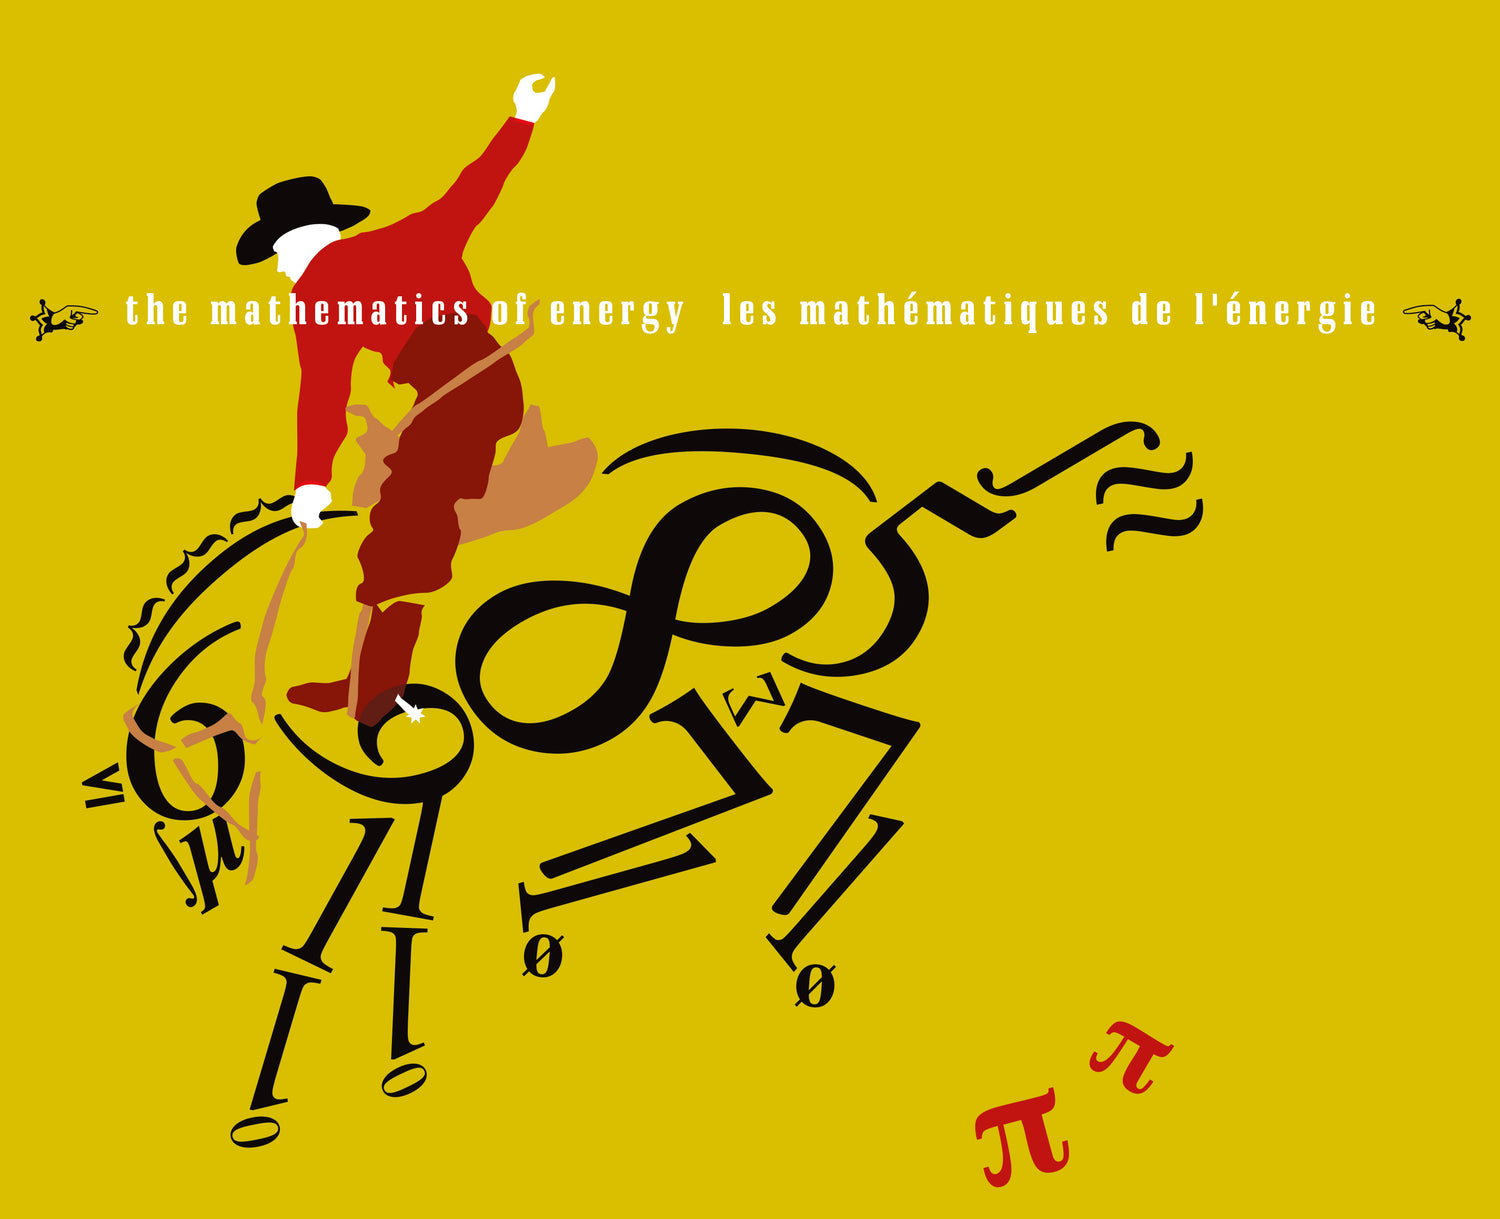 bay6 creative design of custom illustration of cowboy on horse made up entirely of mathematical symbols on dark yellow background as part of a poster graphic for Mitacs